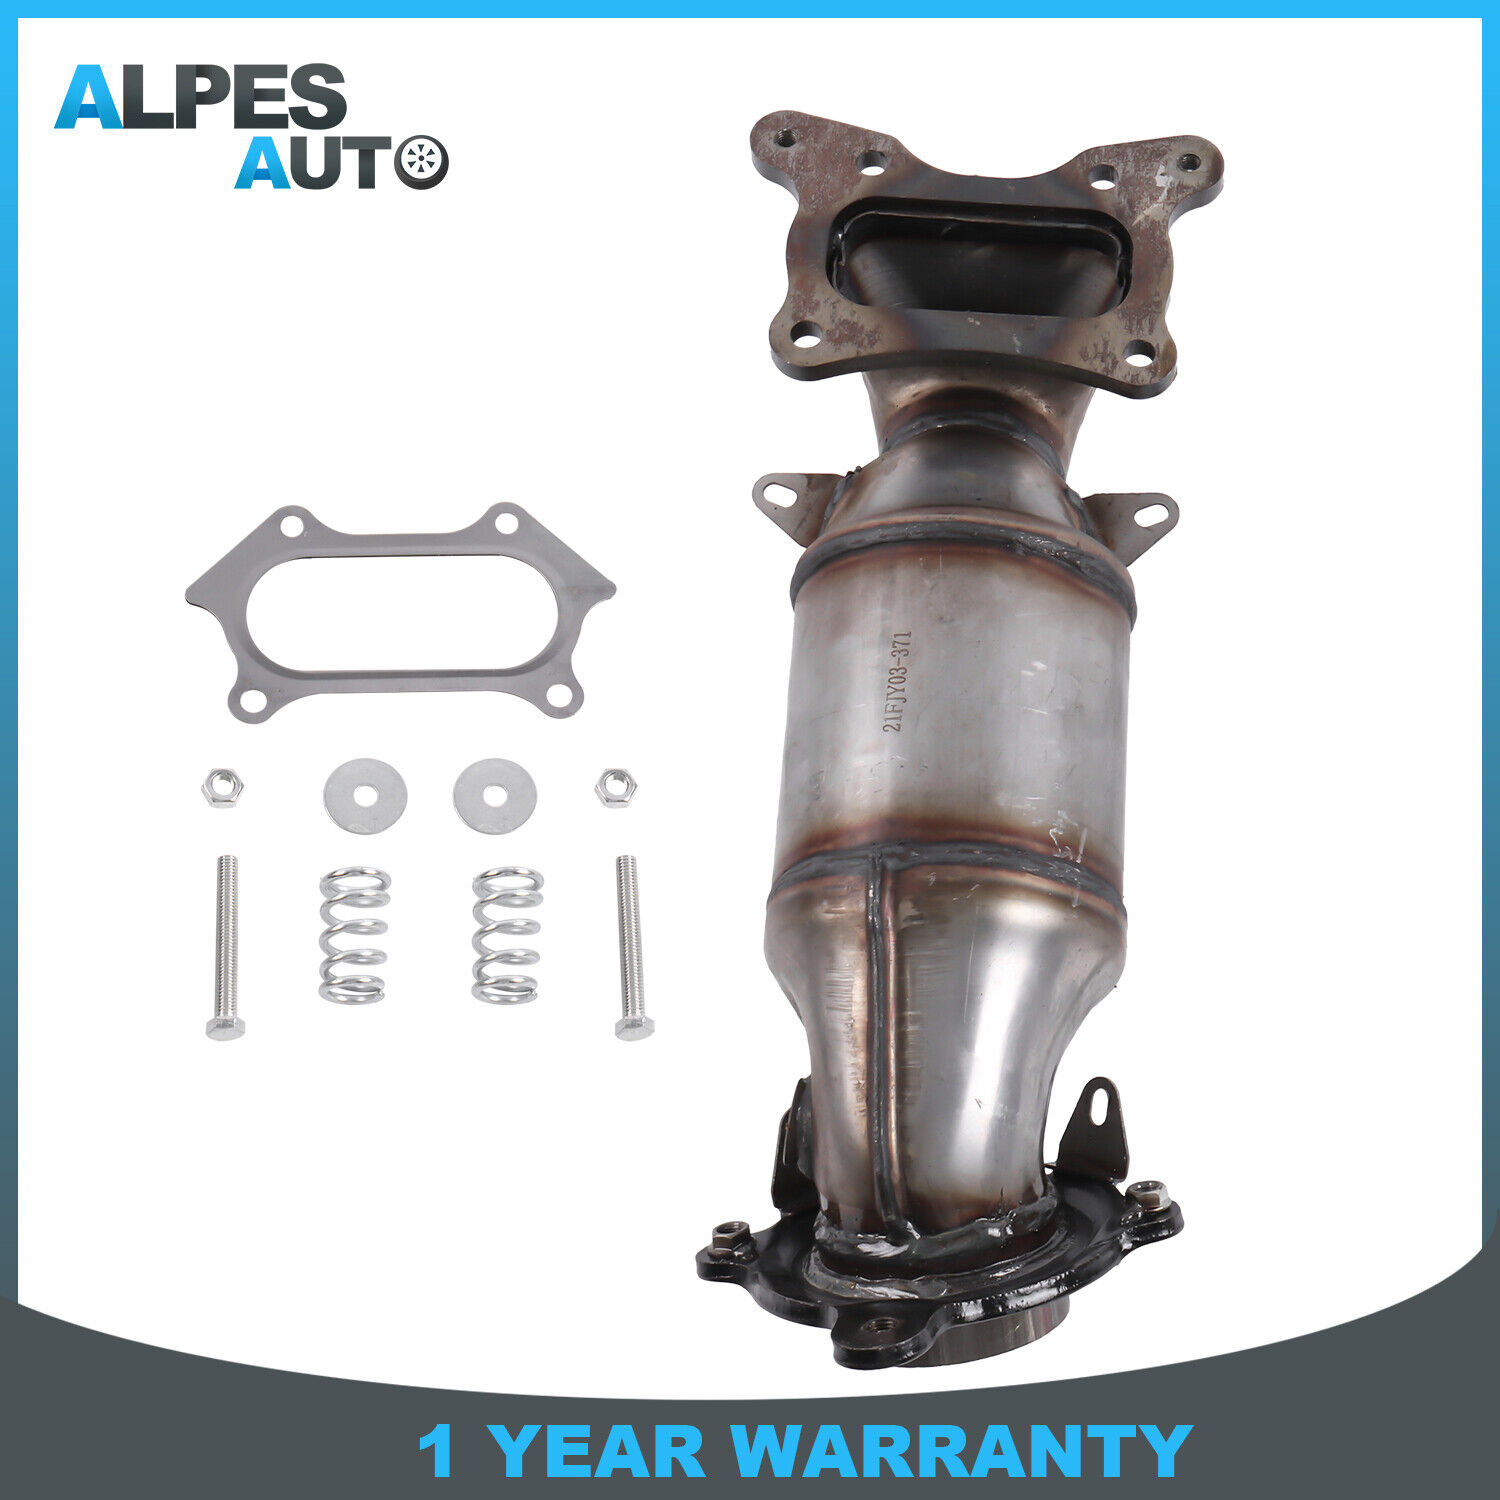 Front Exhaust Manifold +Gasket 17327 For 08-12 Honda Accord 09-14 Acura TSX 2.4L